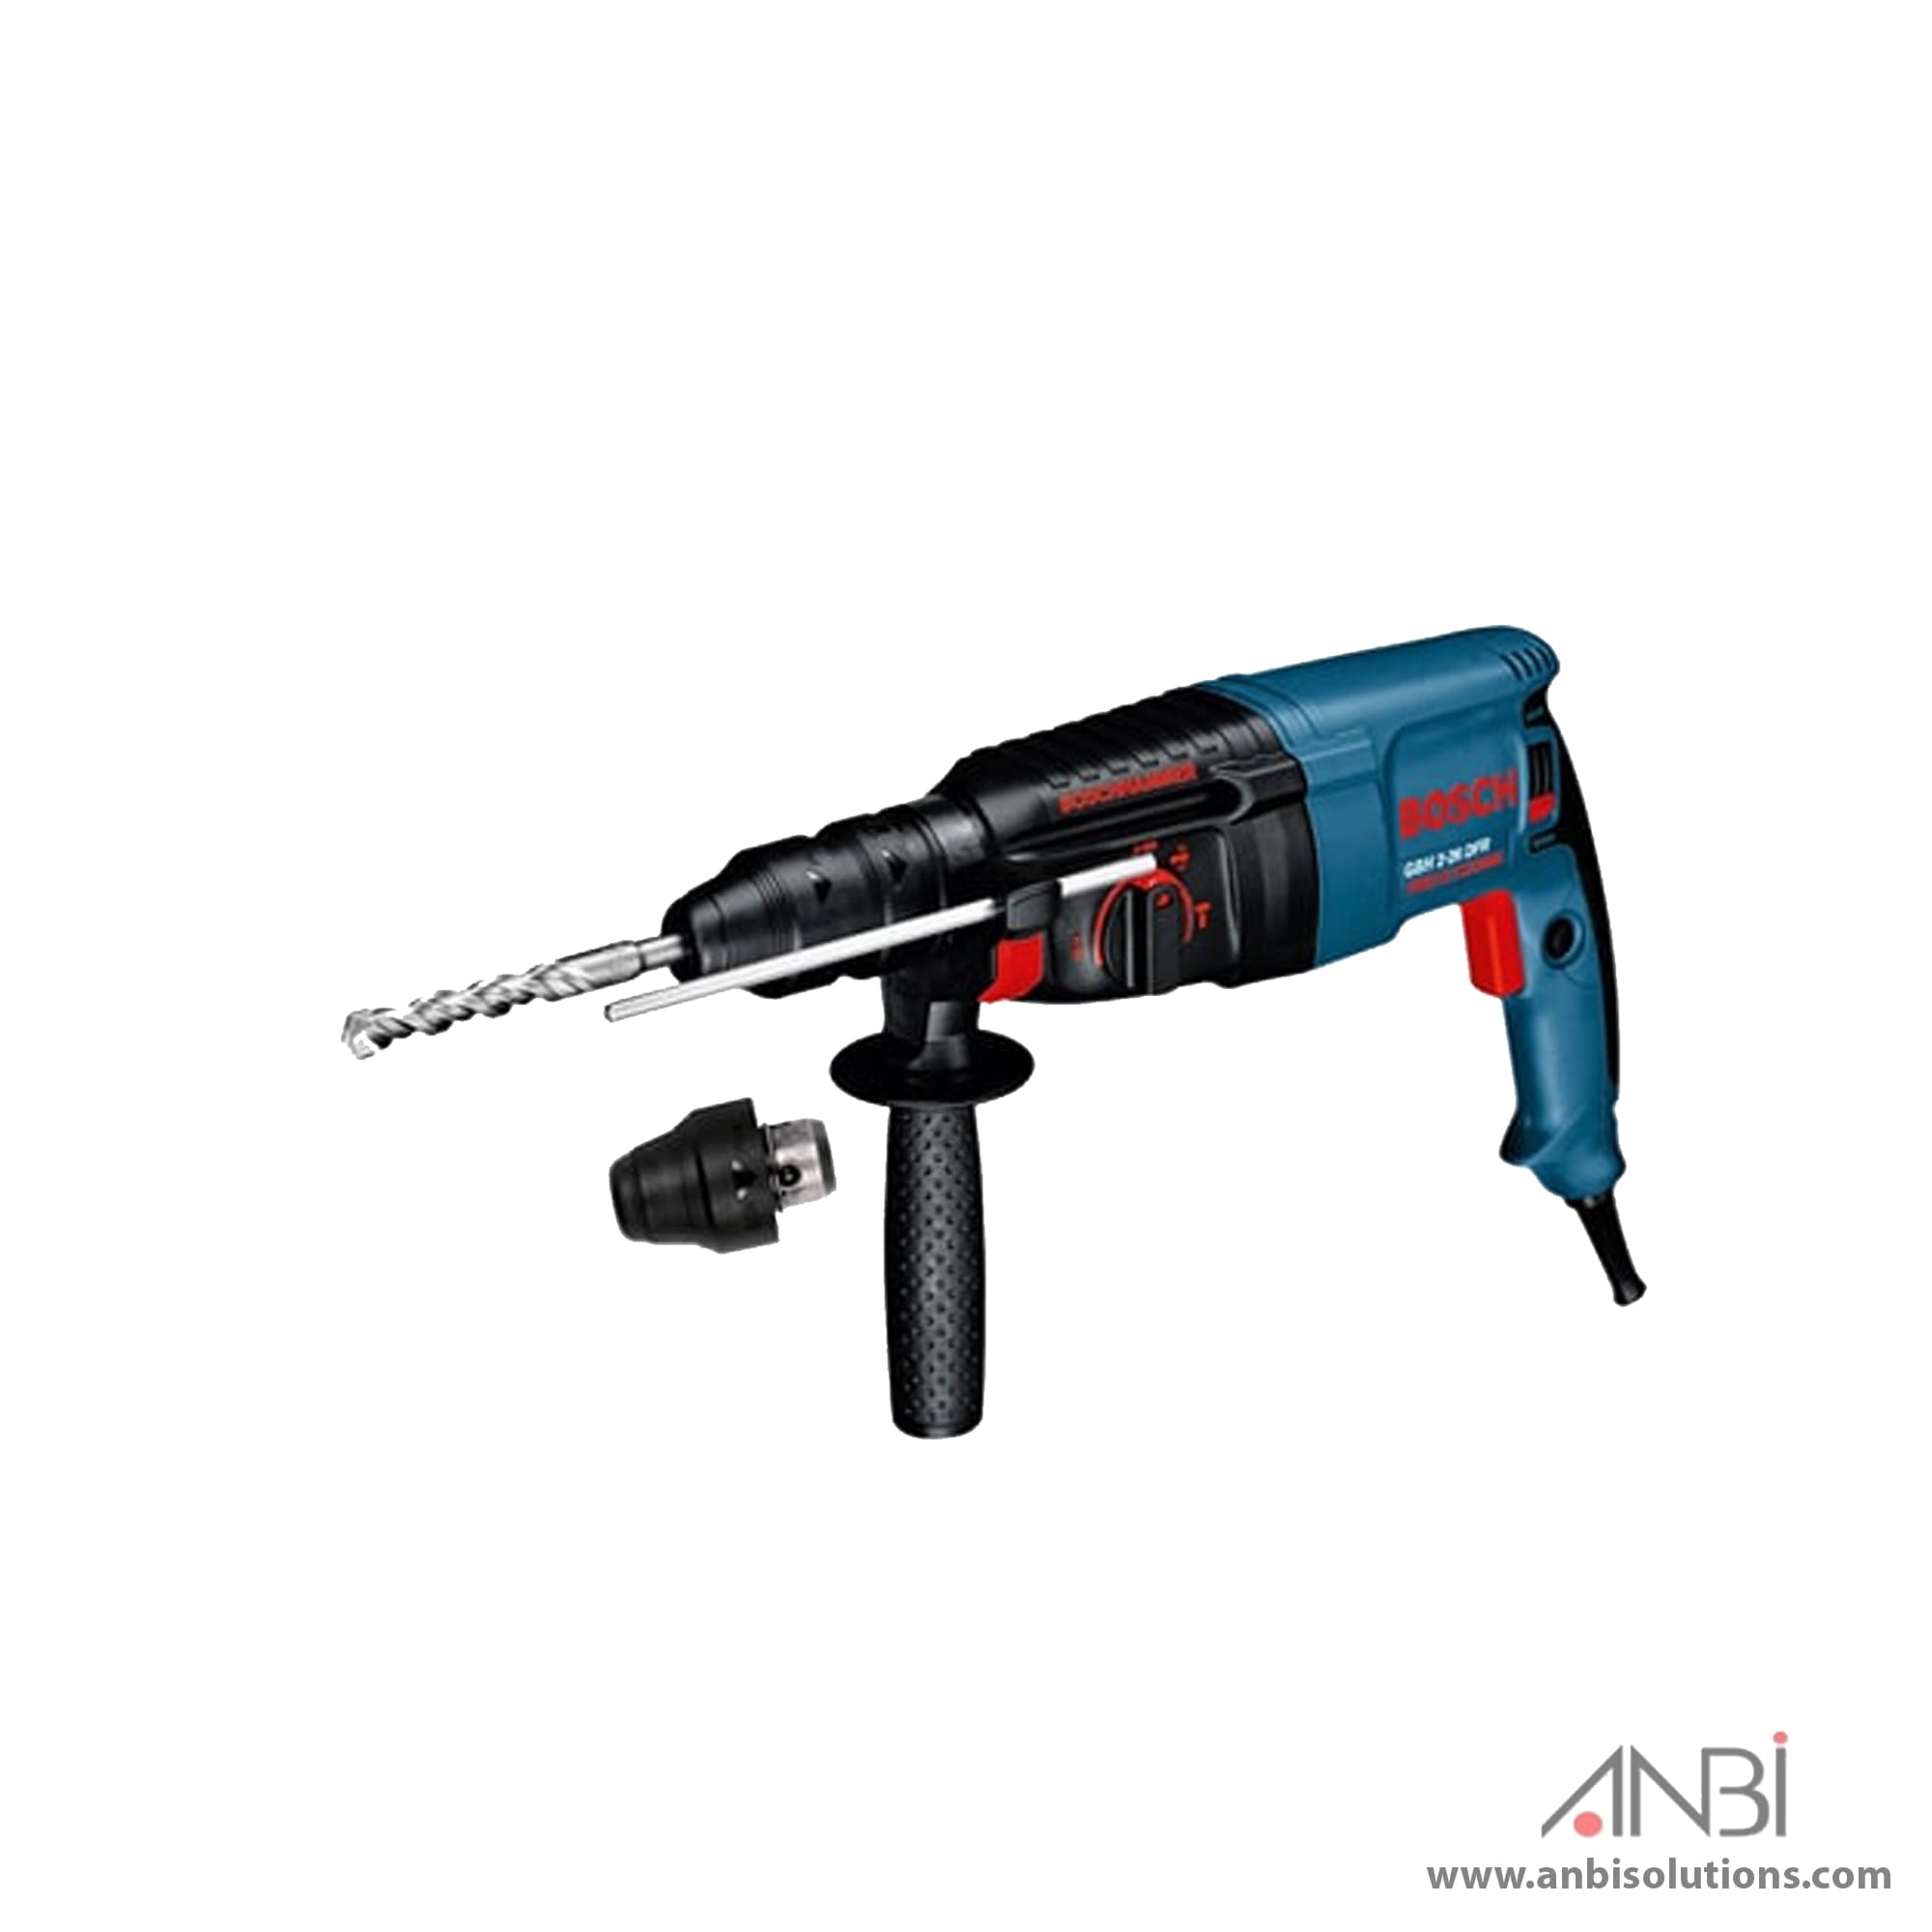 Bosch GBH 2-26 DFR Rotary Hammer with SDS plus